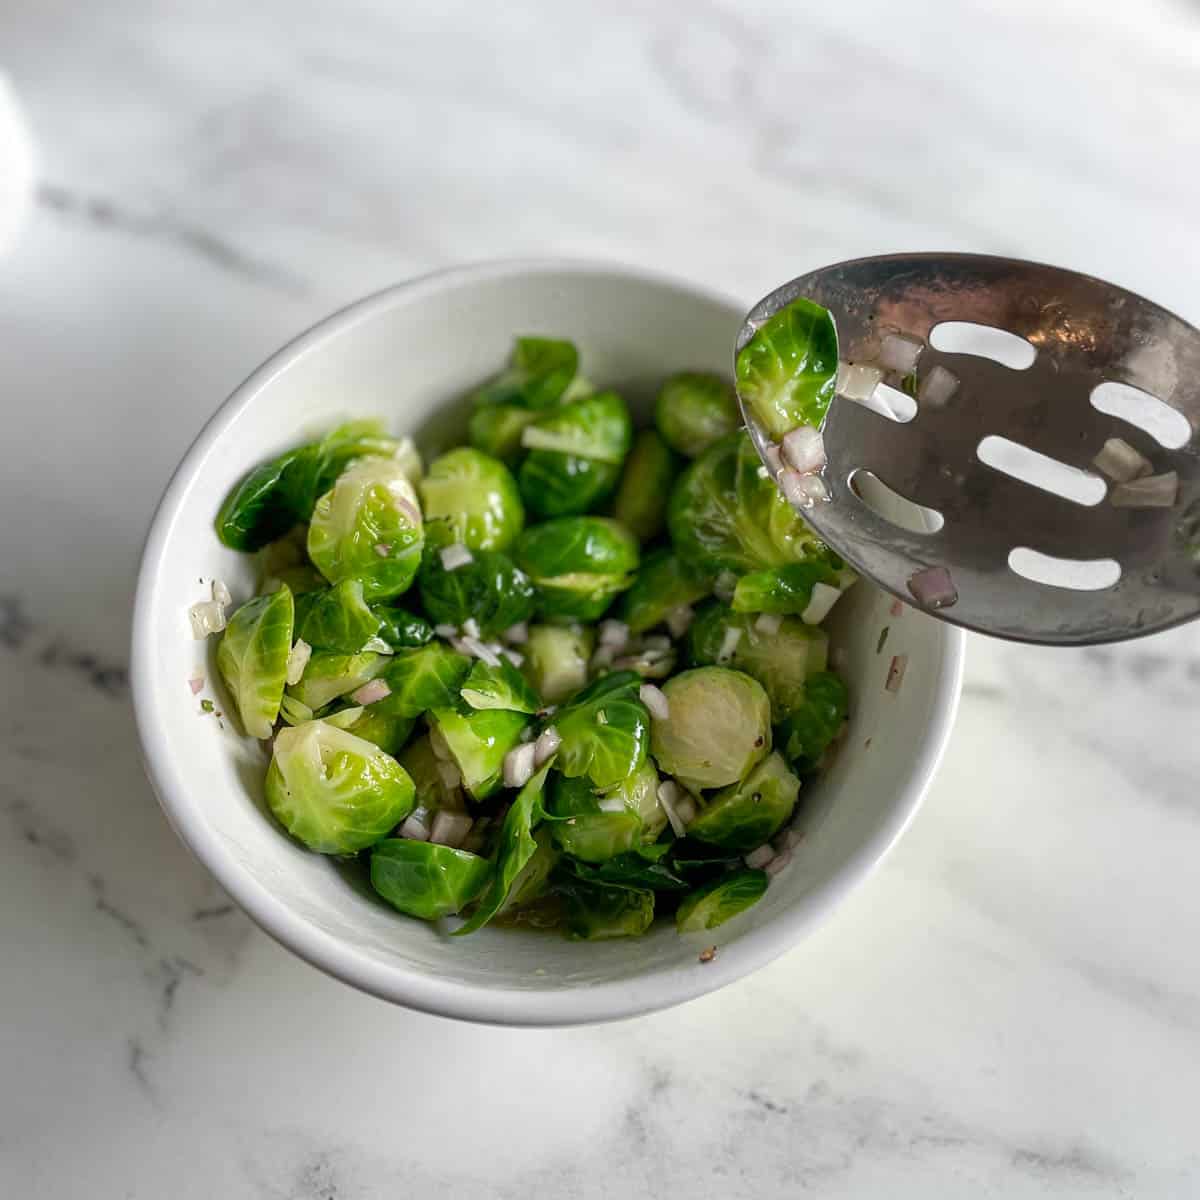 Halved brussels sprouts and marinade are mixed together with a slotted spoon.